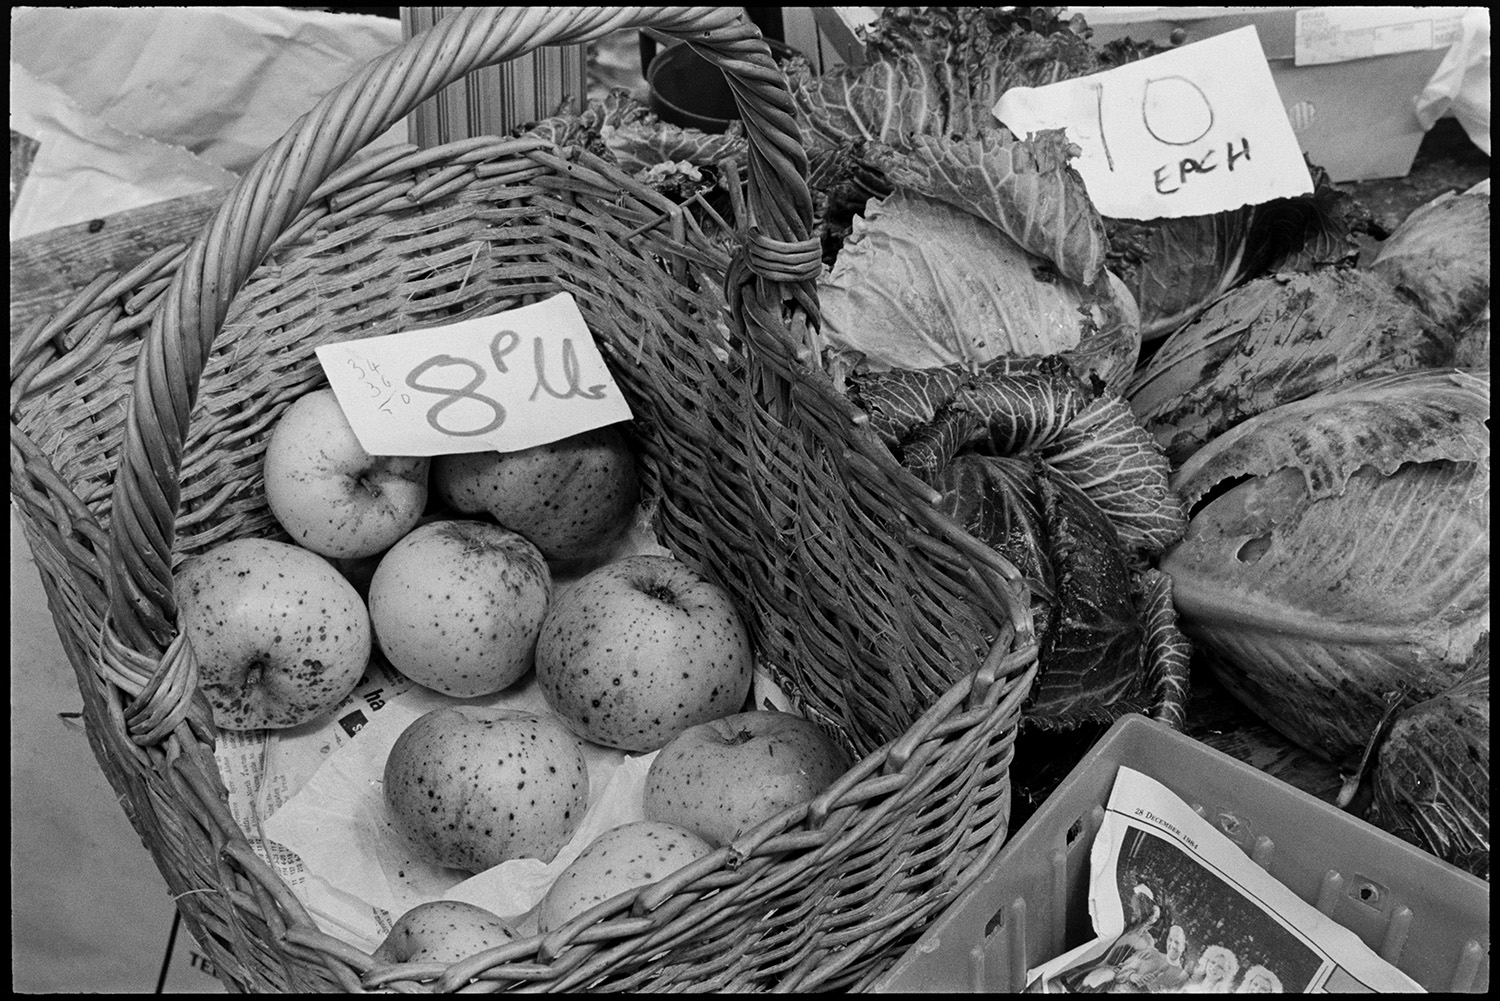 Pannier market, vegetables in baskets, potatoes, swedes, leeks.
[A basket of apples and an assortment of cabbages with price labels on a vegetable and fruit stall at Barnstaple Pannier Market.]